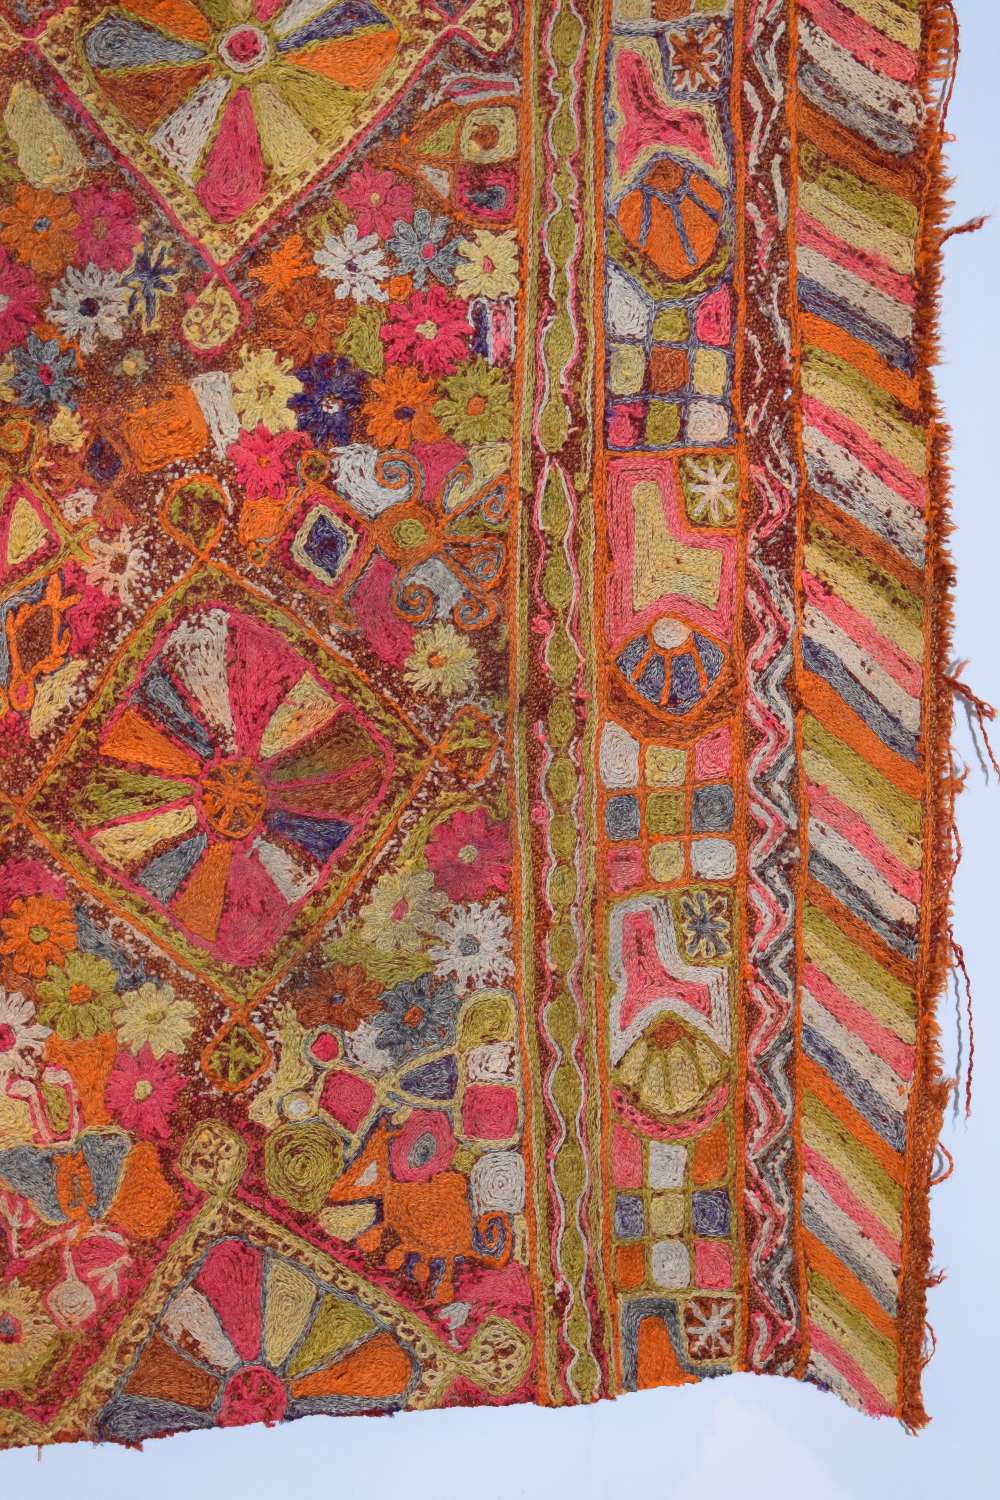 Iraqi embroidered wedding blanket, Samawa, Marshlands of southern Iraq, 20th century, 5ft. 4in. 1. - Image 2 of 13